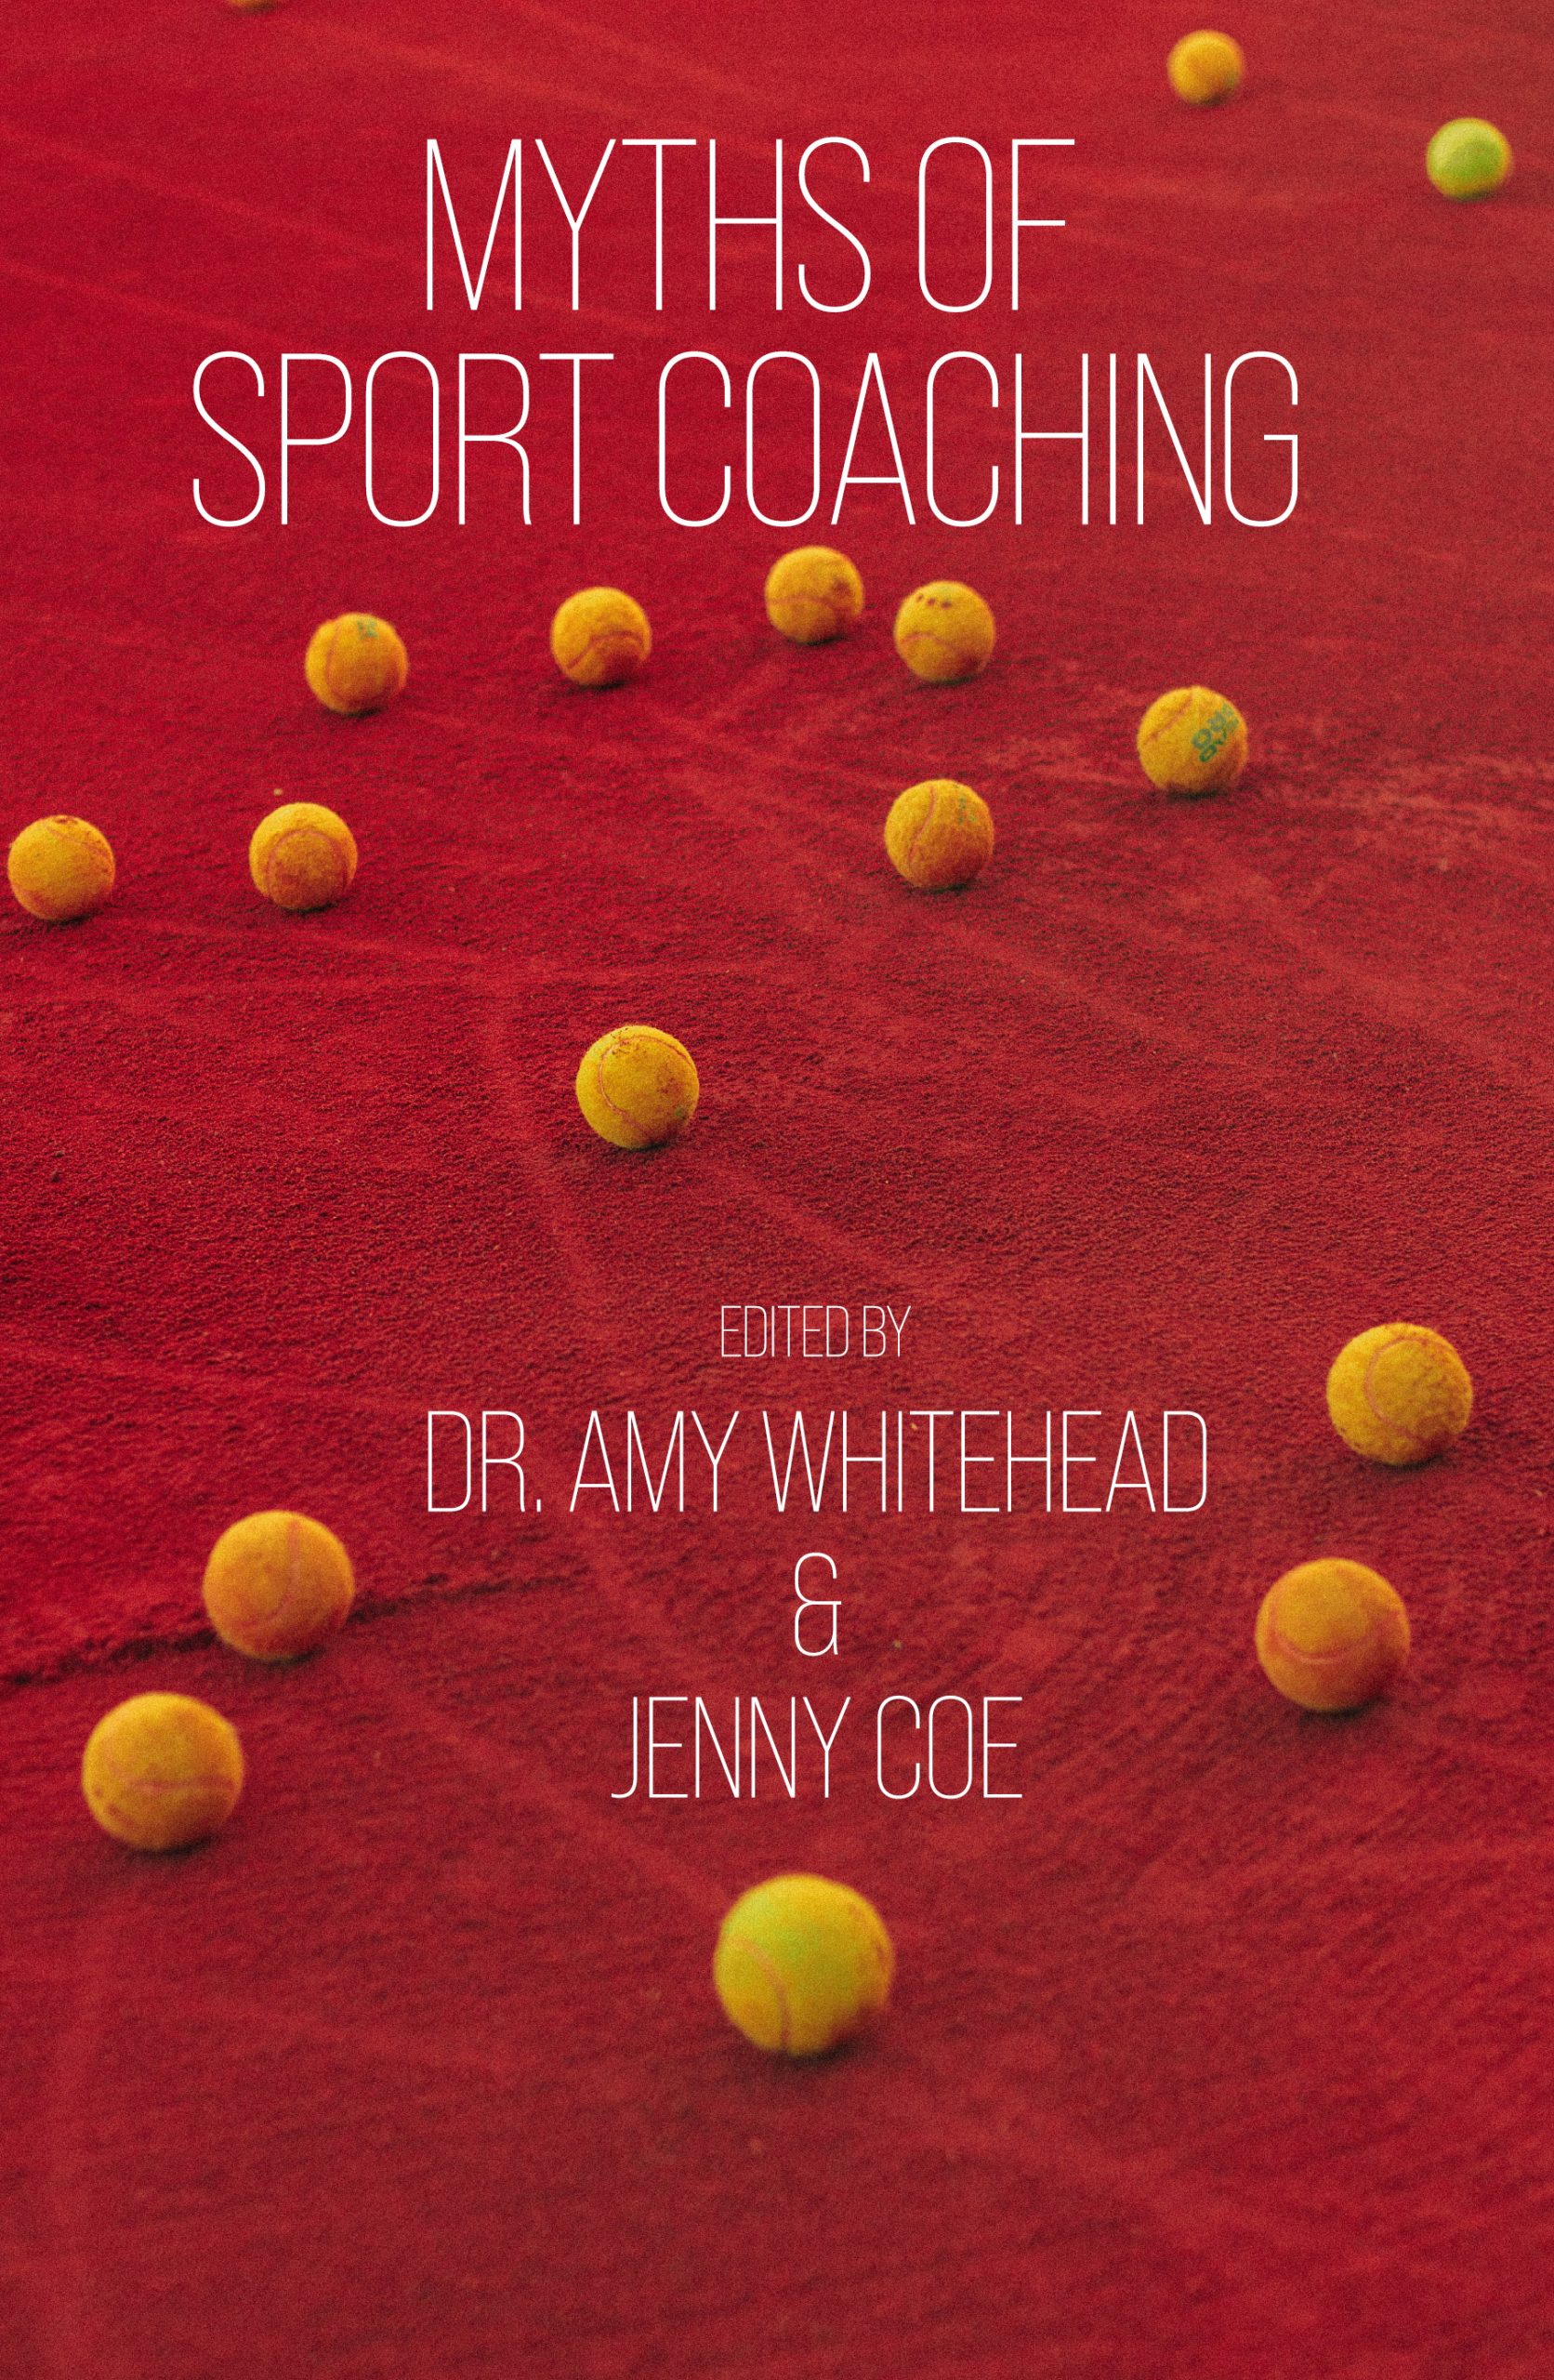 Myths of Sport Coaching